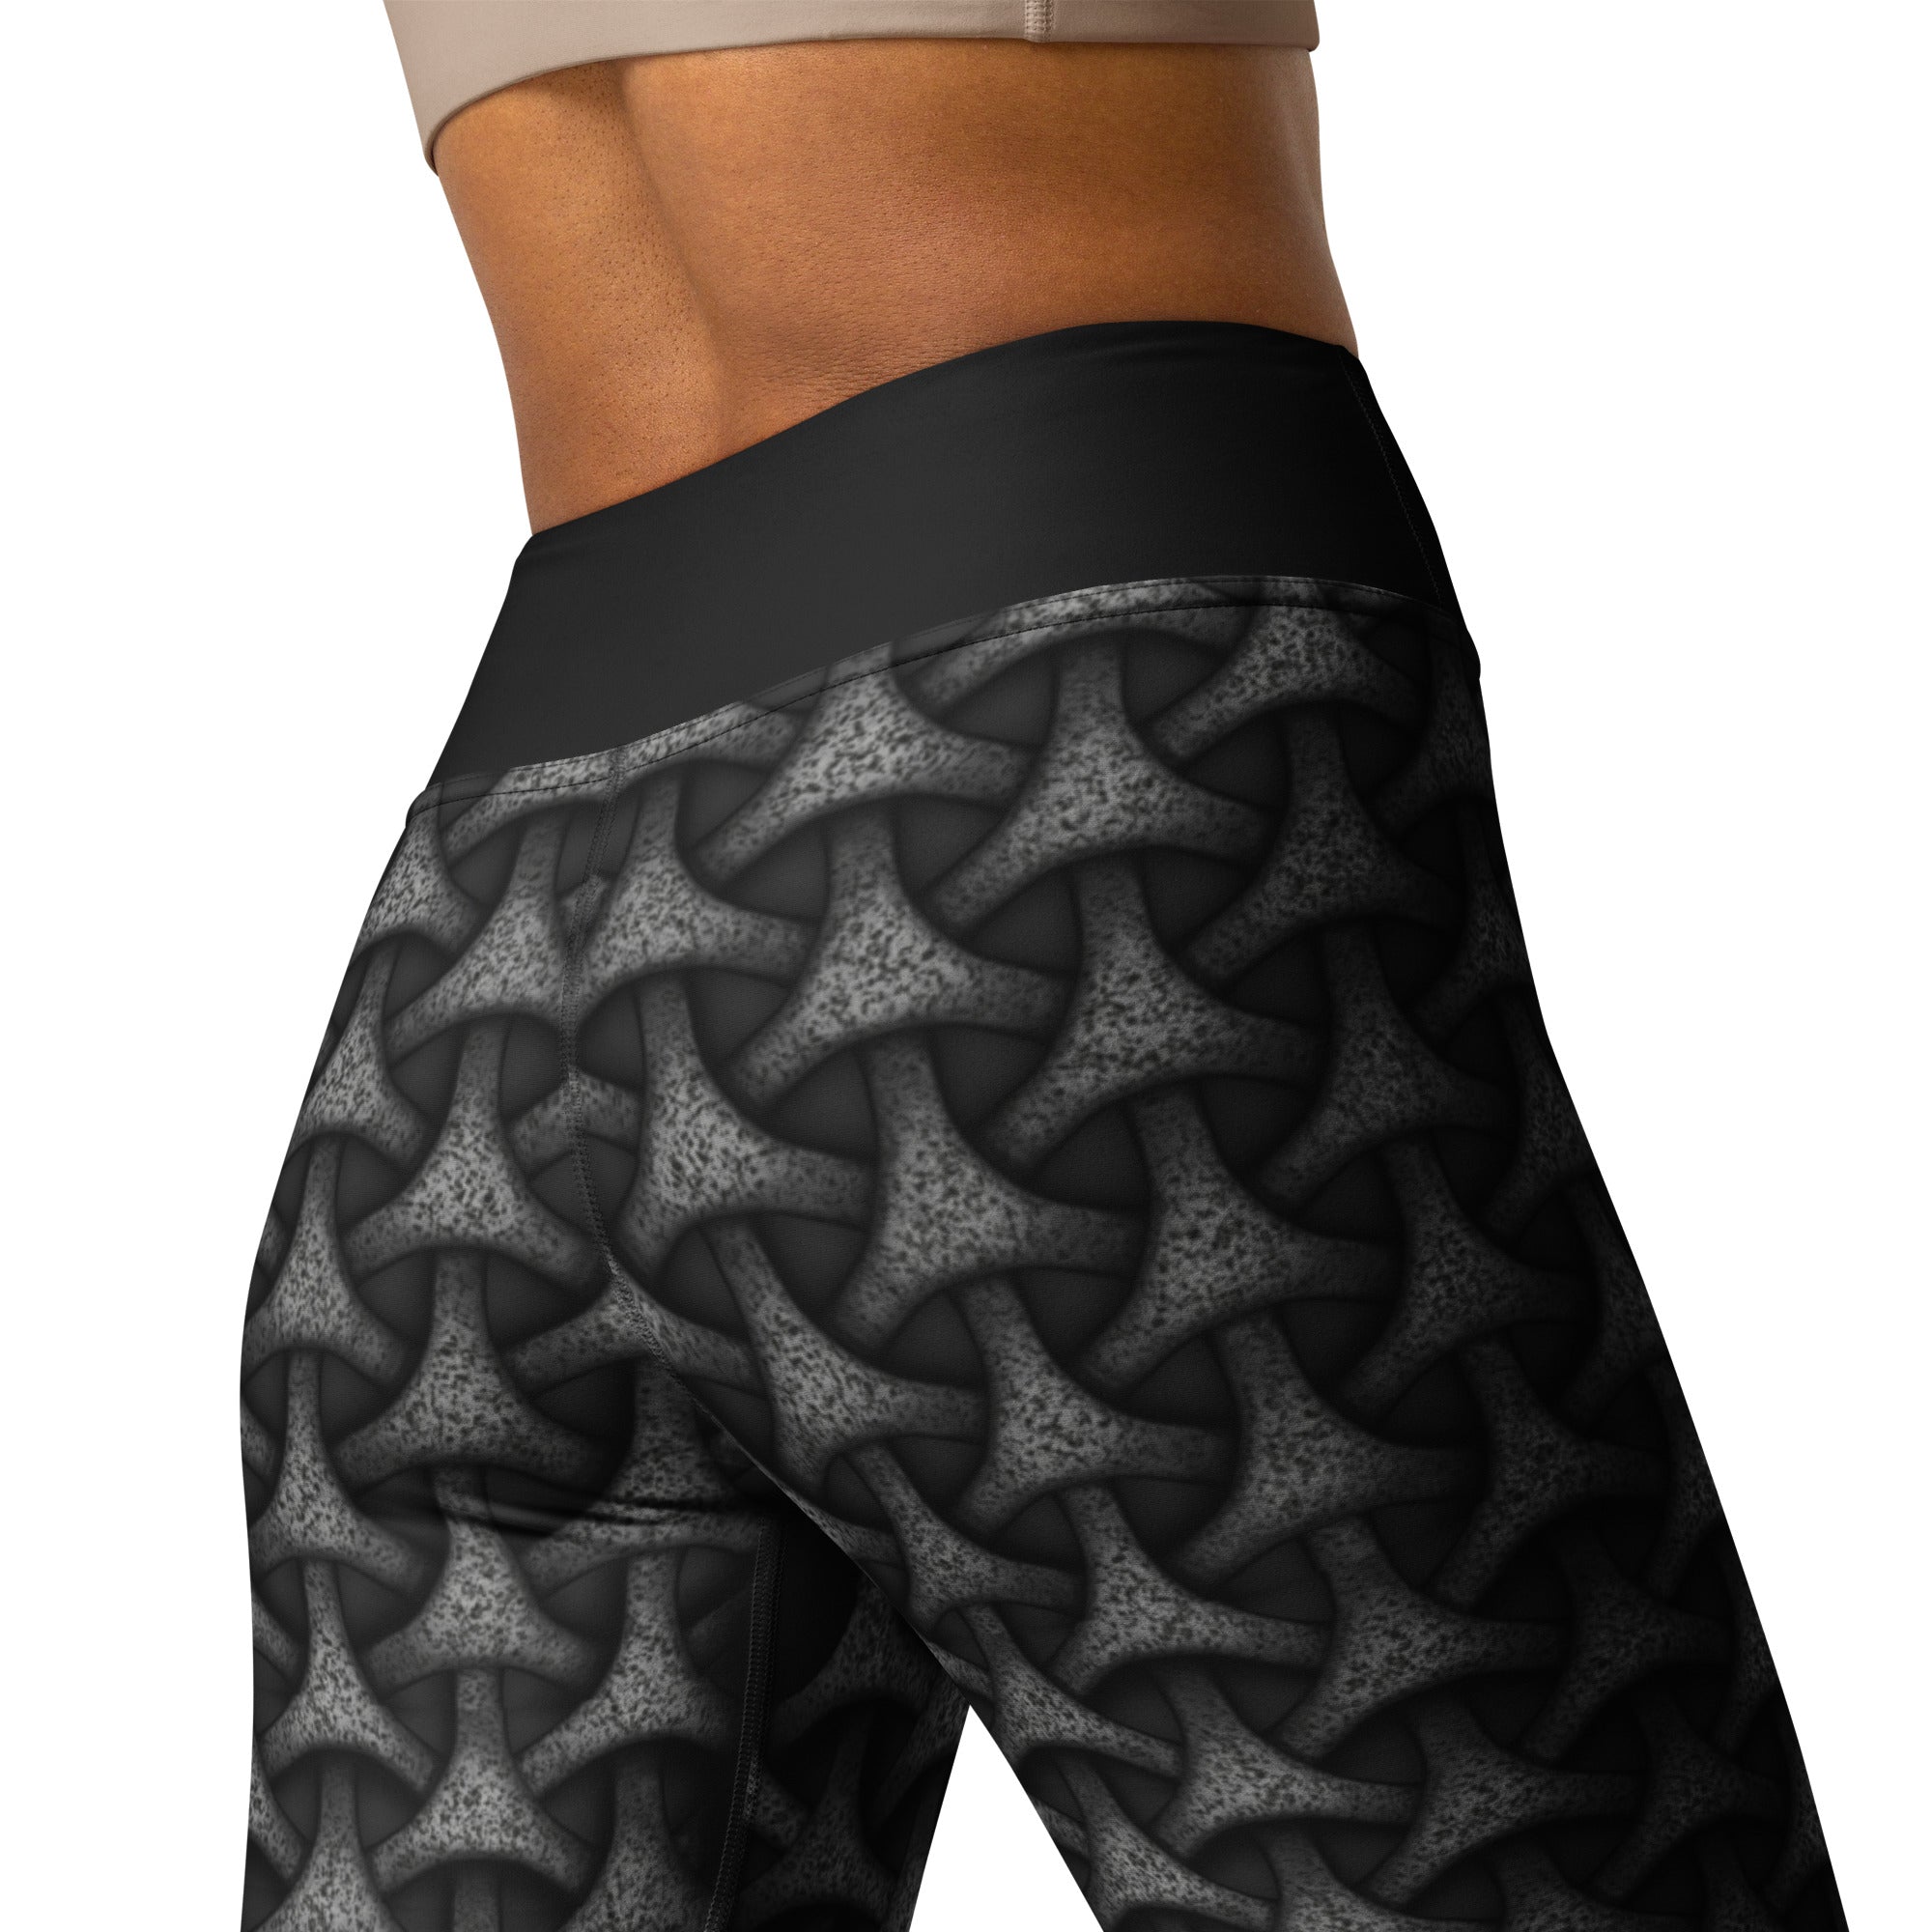 Displaying flexibility and style with Cosmic Fusion Tristar Yoga Leggings at the gym.